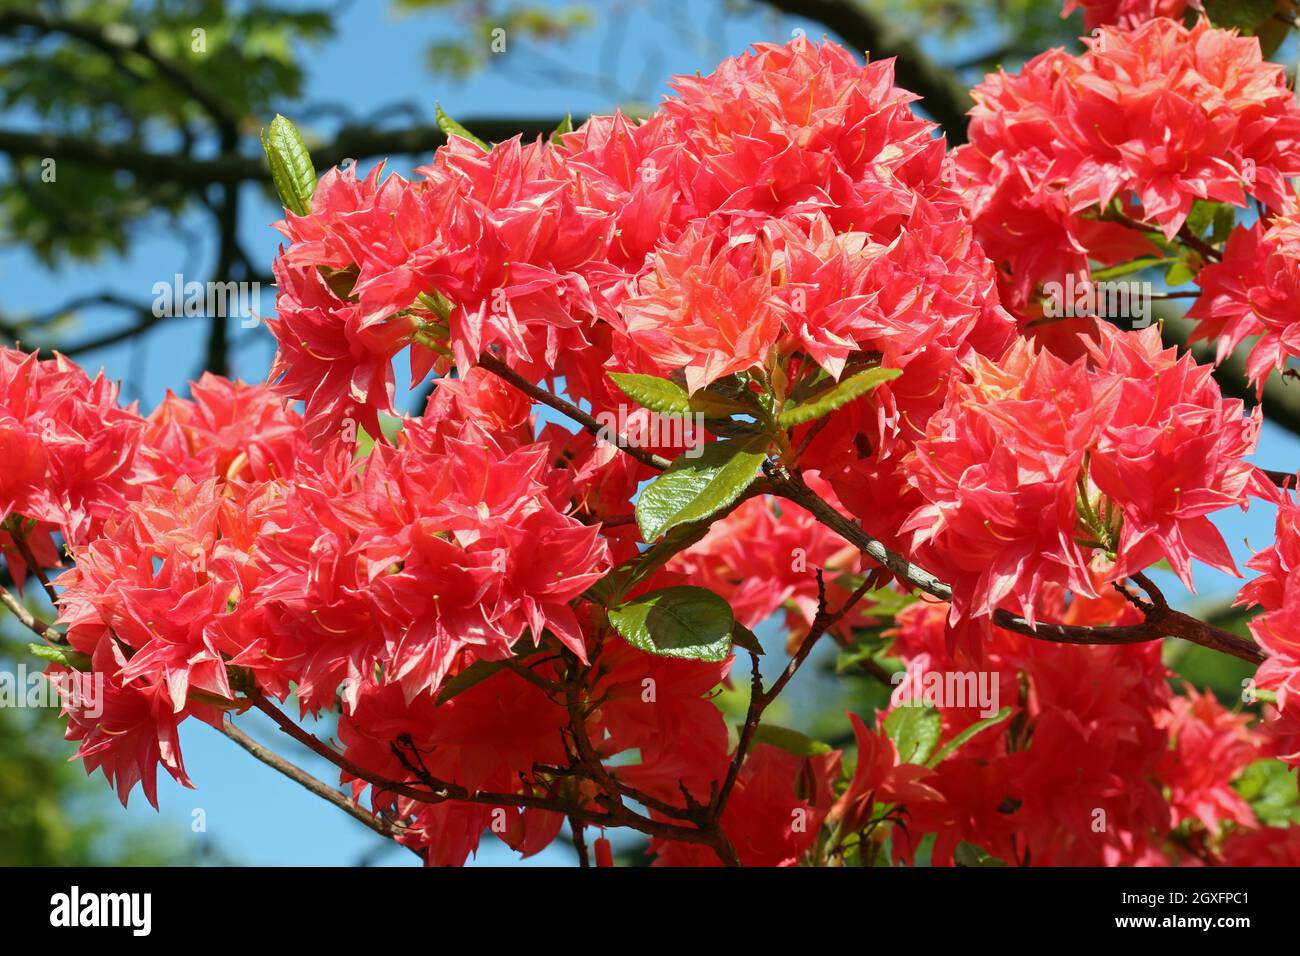 Red tinged with orange Rhododendron flower head with a dark blurred background of leaves and flowers with blue sky. Stock Photo